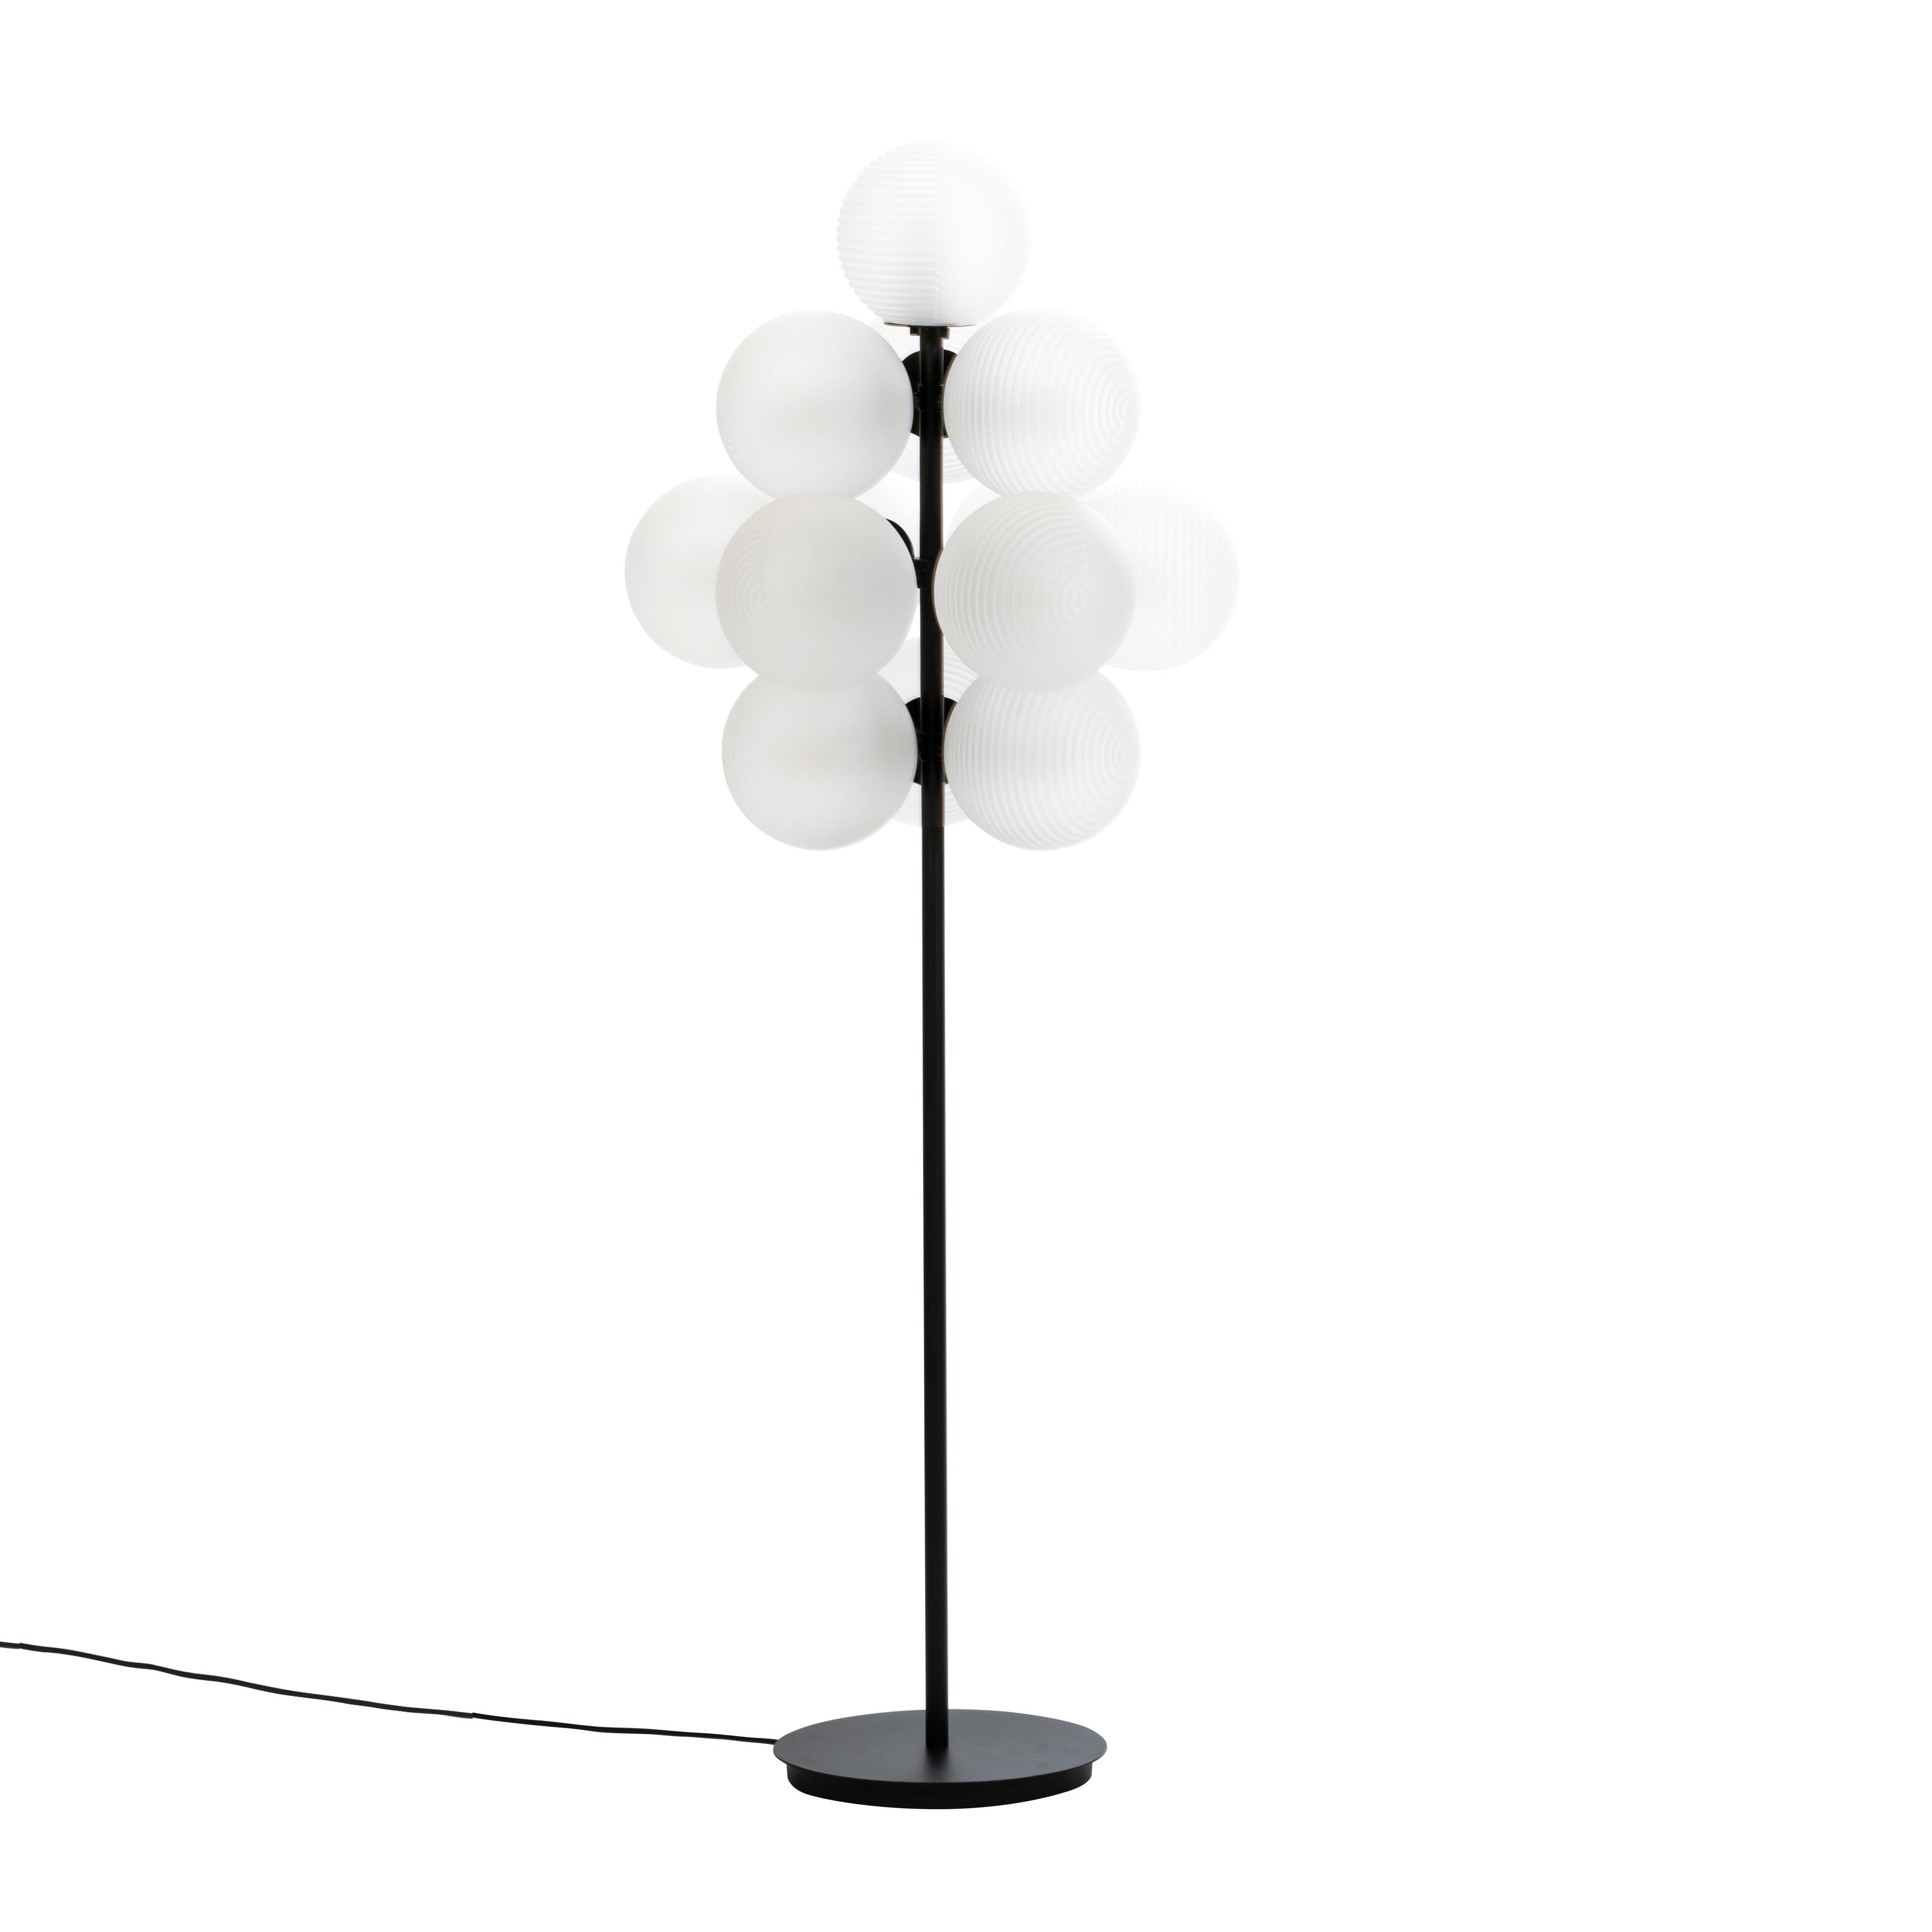 Stellar grape big transparent acetato black floor light by Pulpo
Dimensions: D61 x H158 cm
Materials: handblown glass coloured ,powder coated steel.

Also available in different finishes. Height can be customised. 

Raised up above the clouds